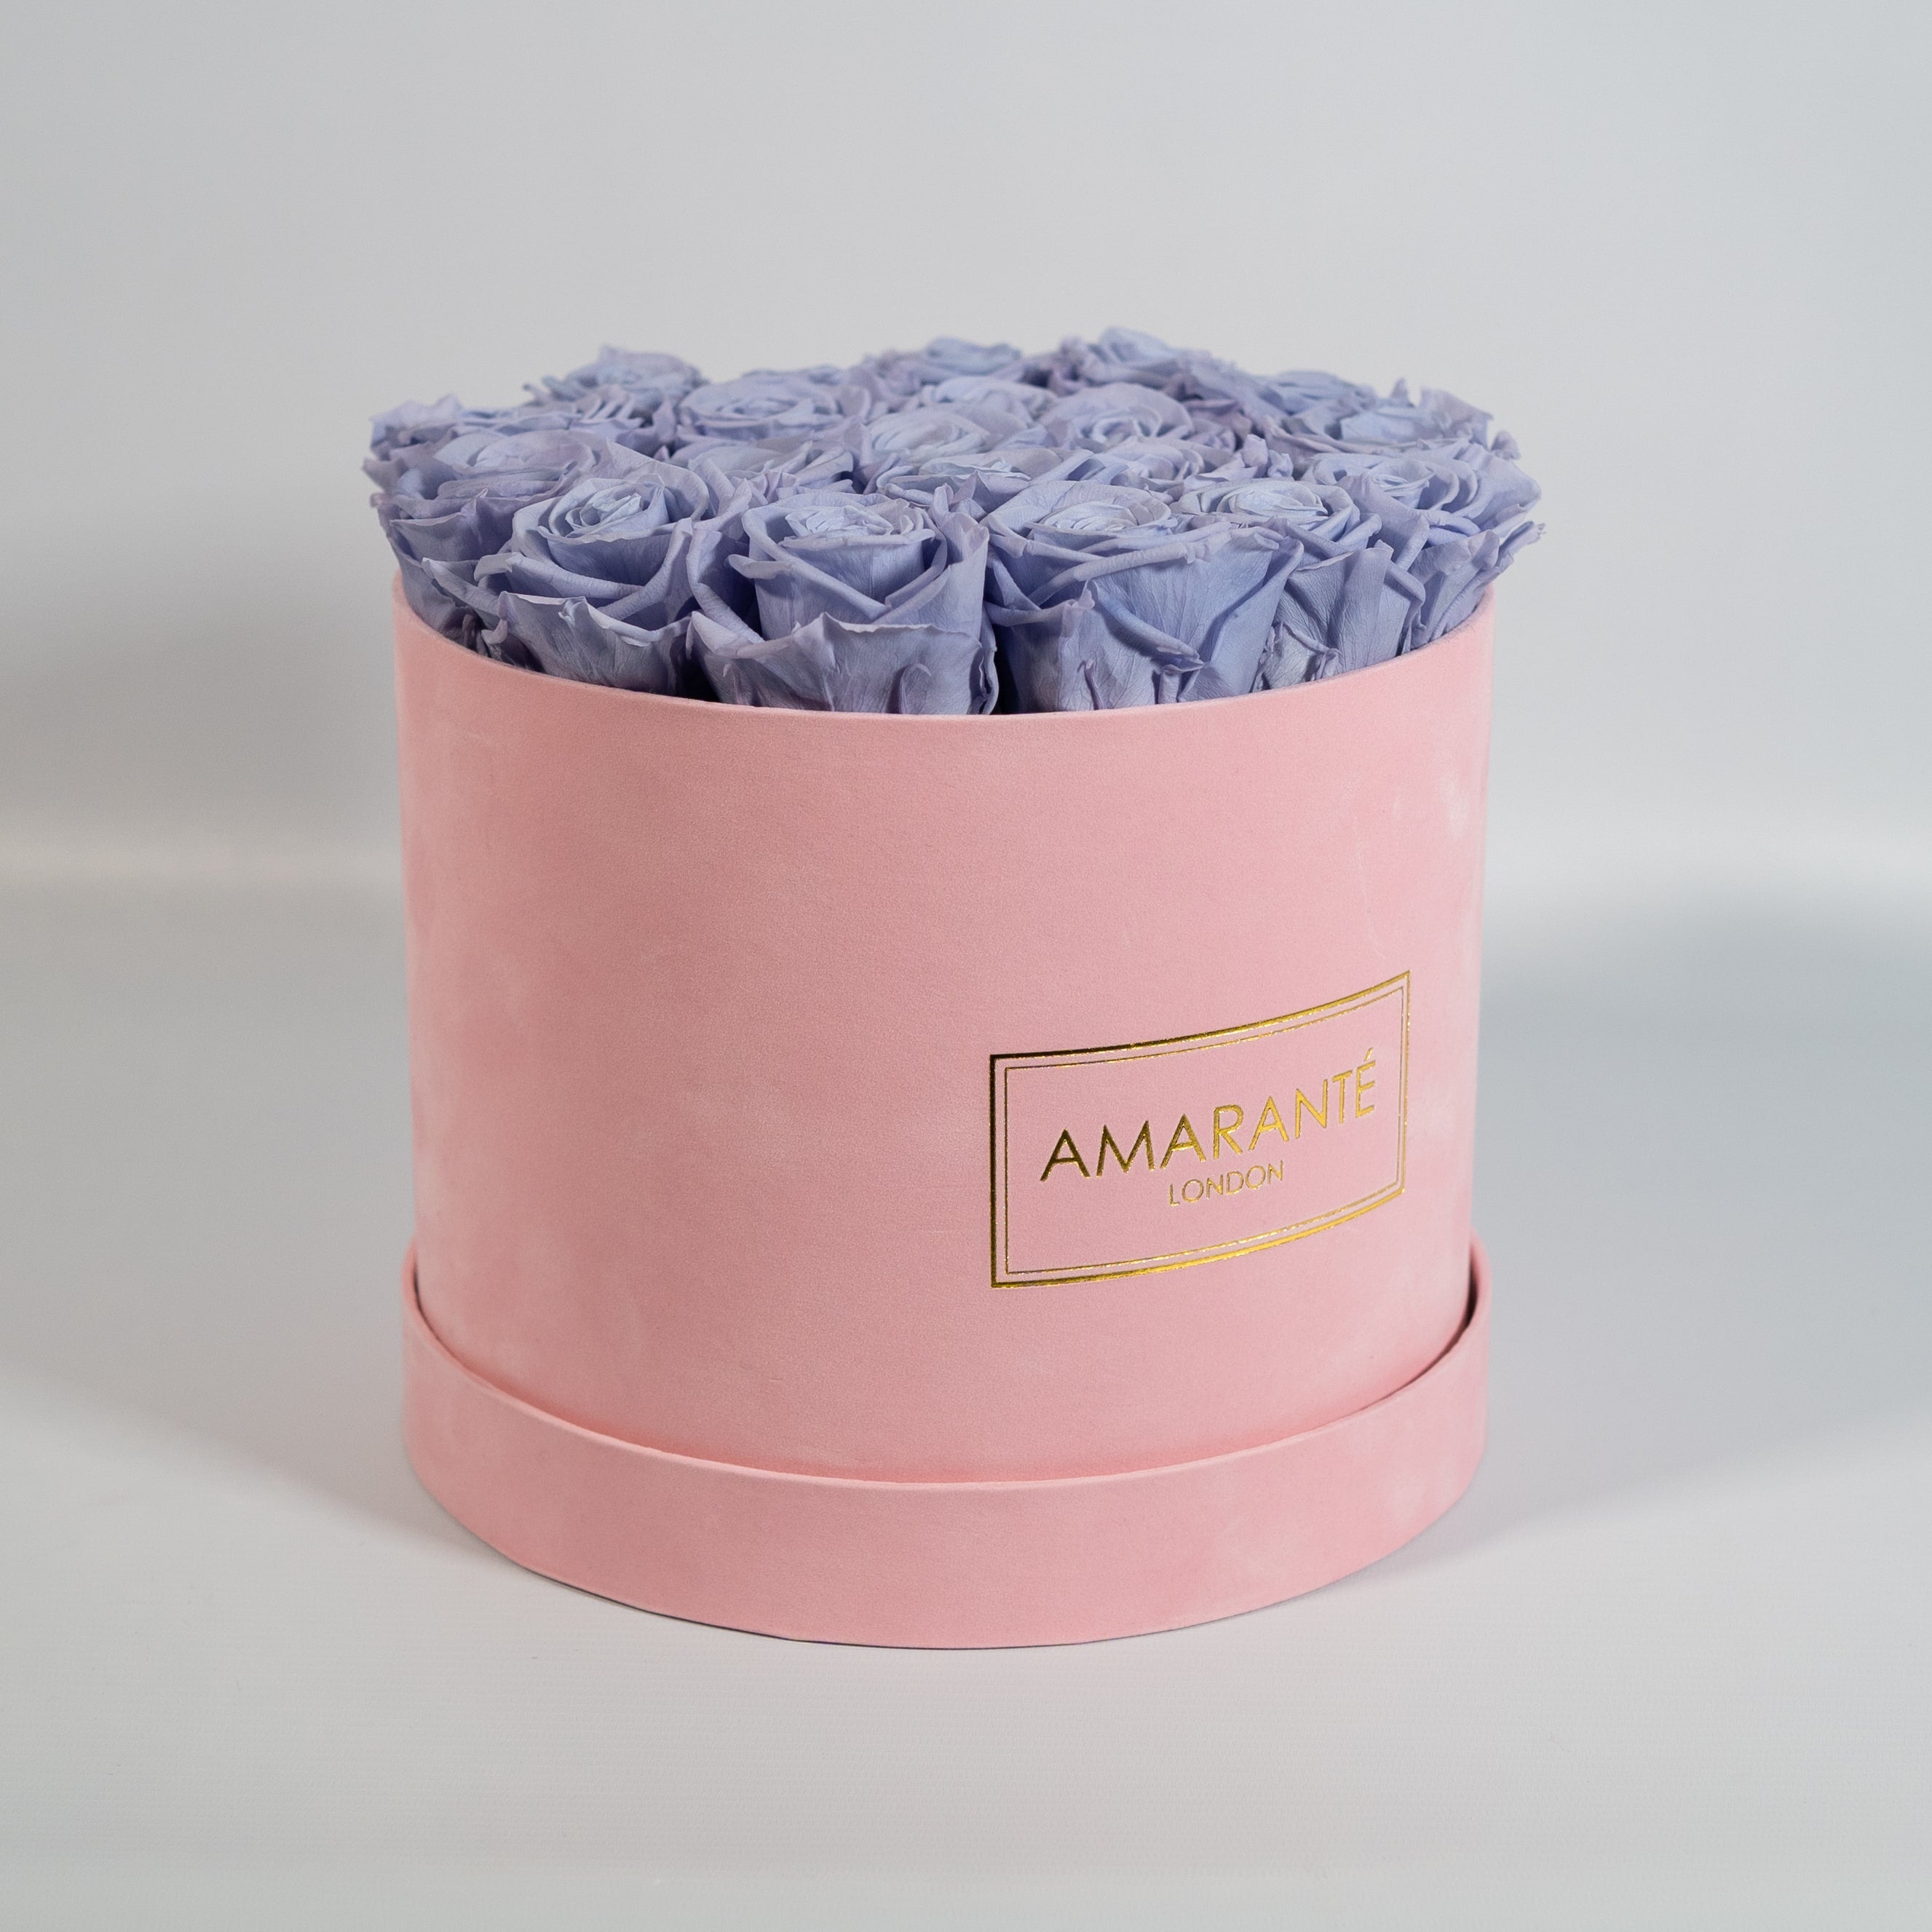 Spring time inspired lavender  Roses shown in a stylish pink box 